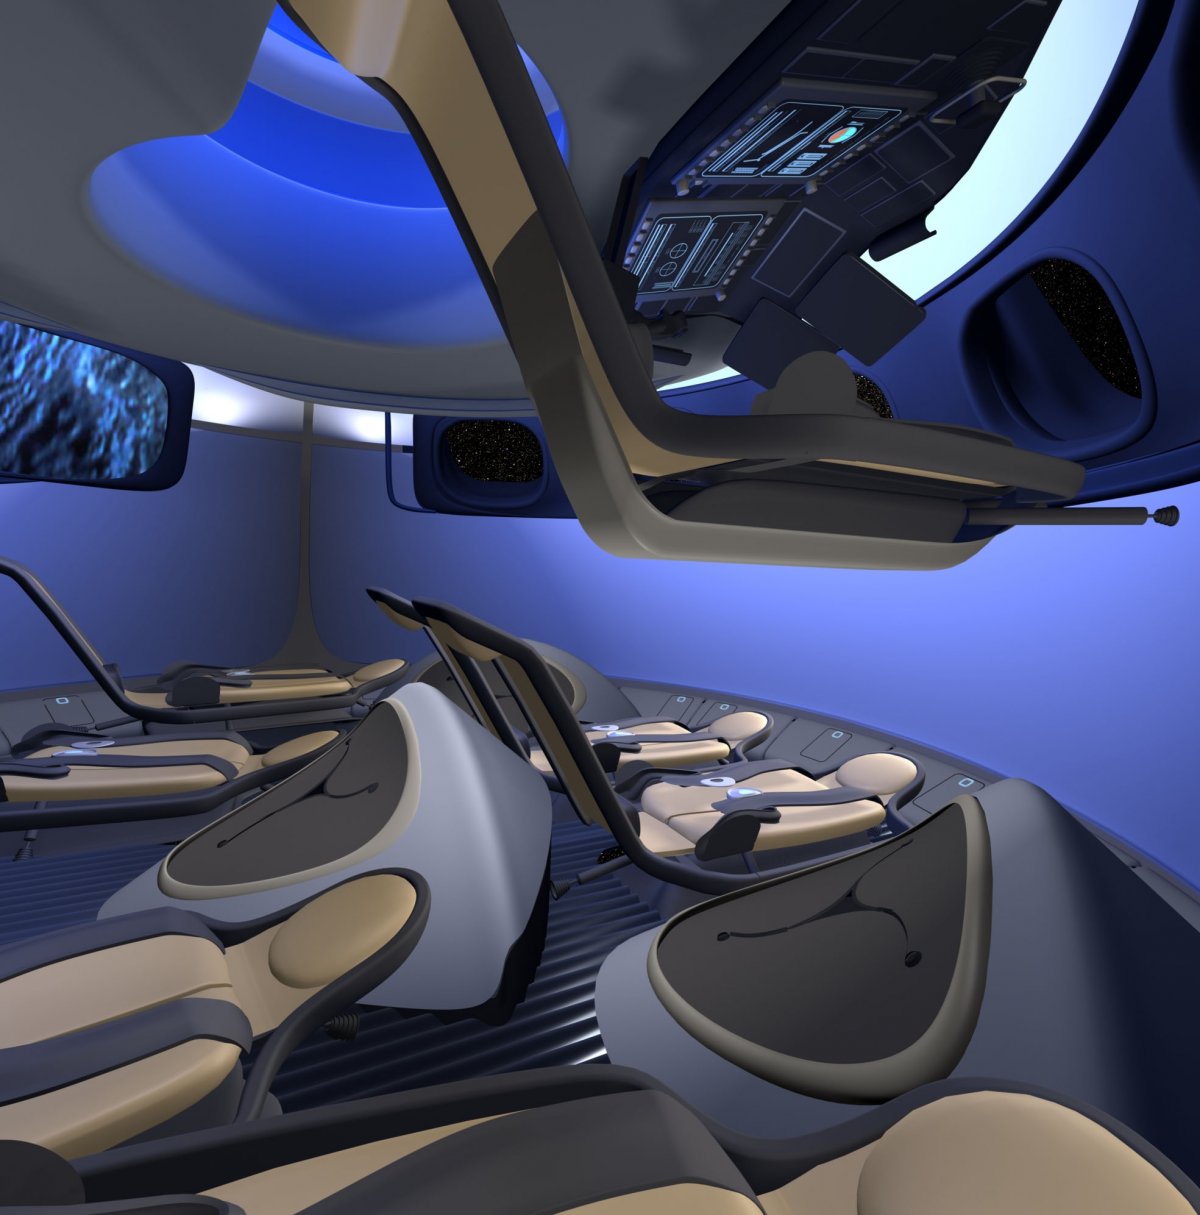 Inside The Boeing Capsule That Could Take You On A Space Holiday